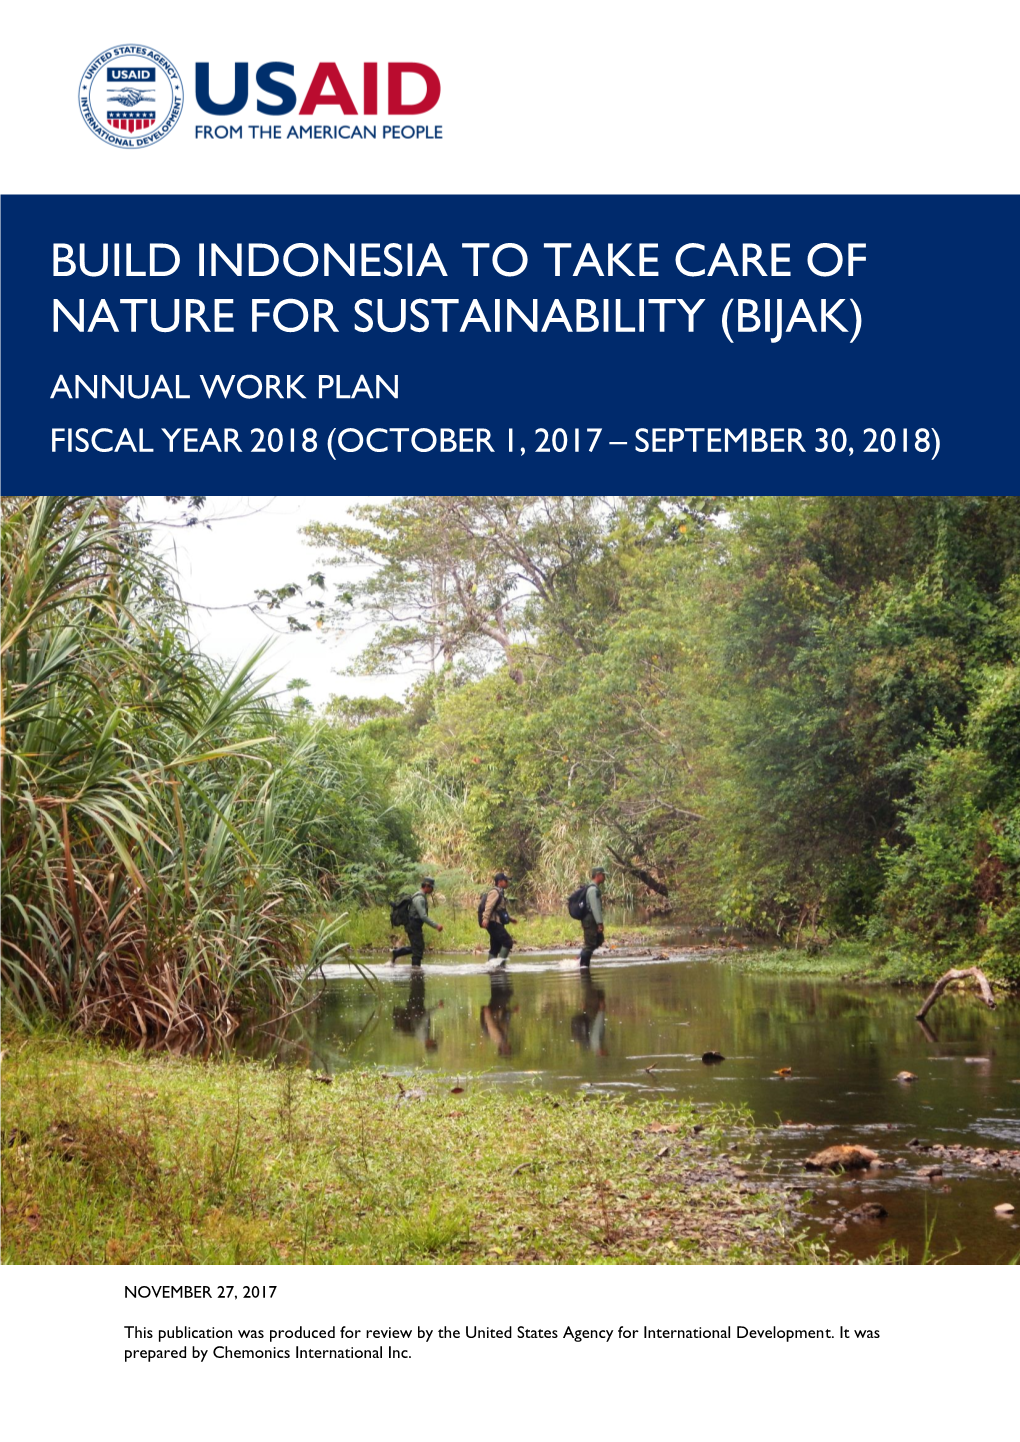 Build Indonesia to Take Care of Nature for Sustainability (Bijak)